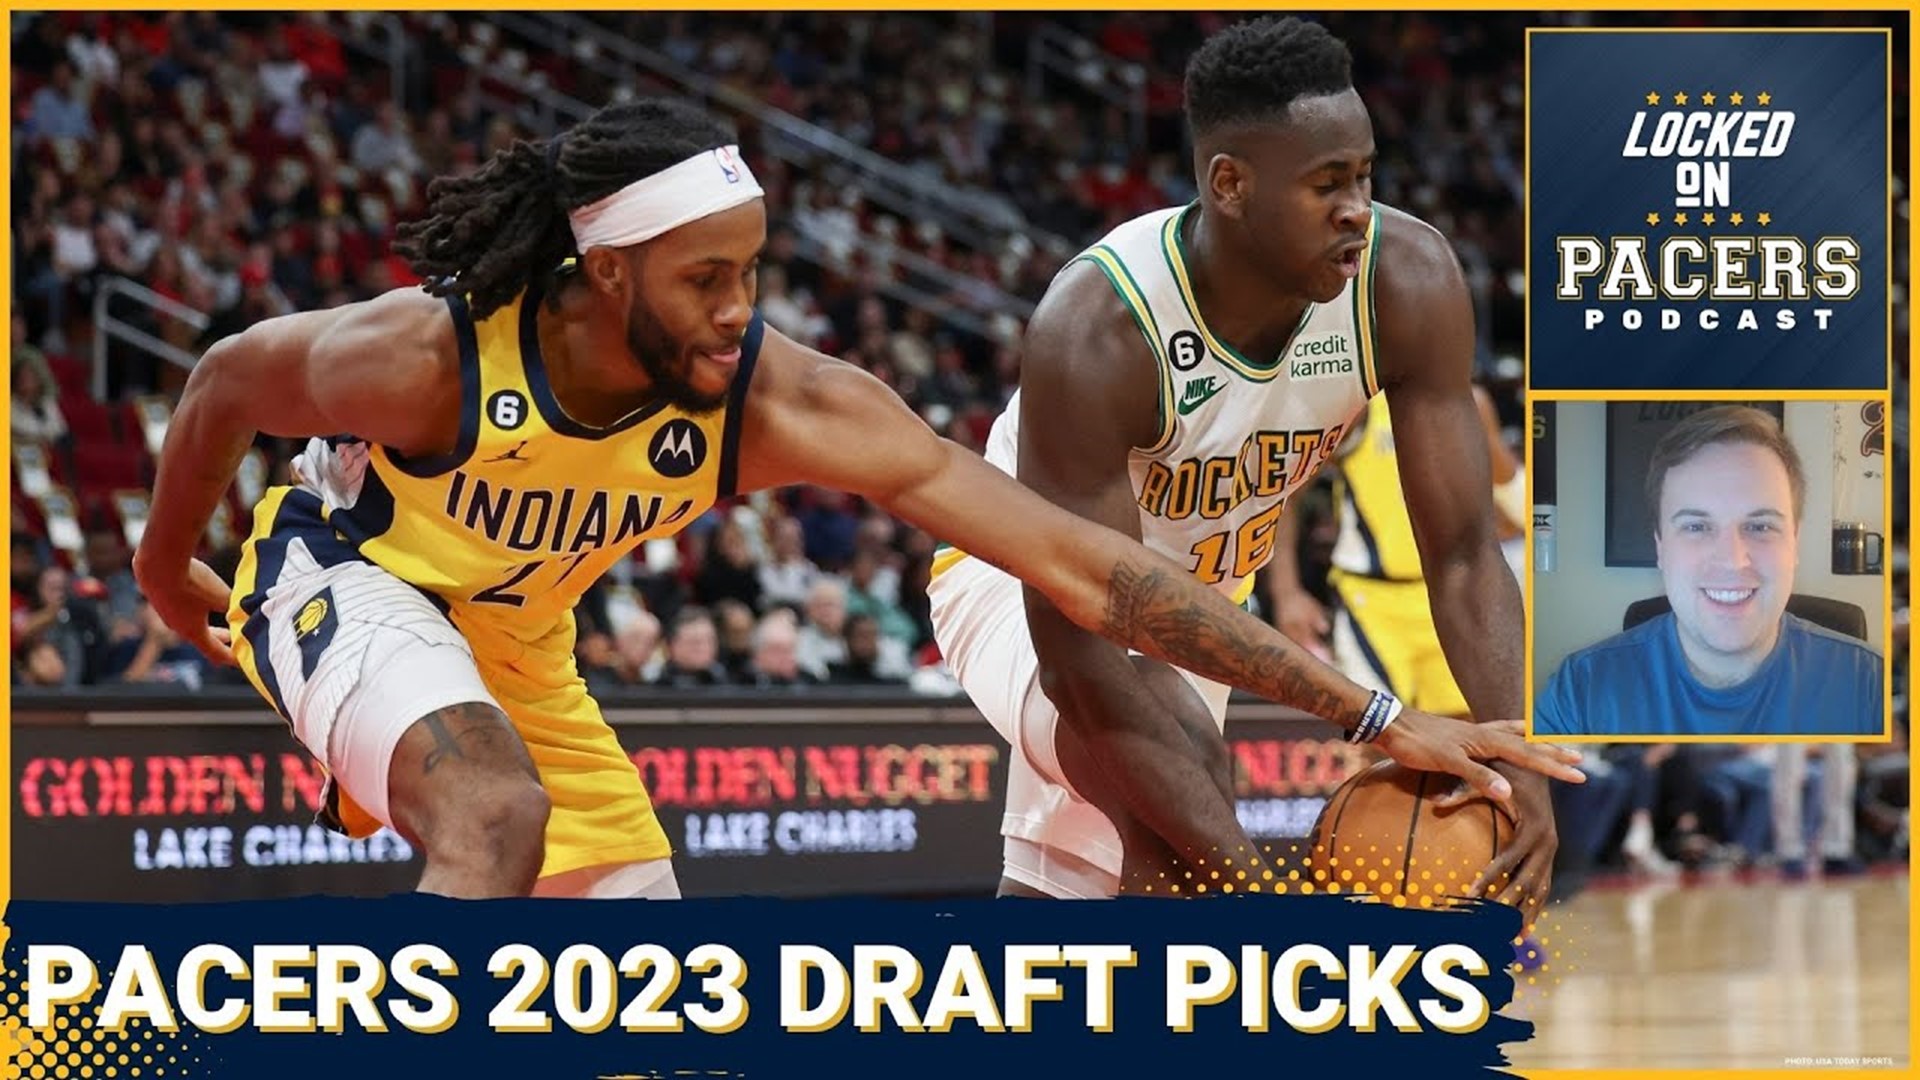 Breaking down the Indiana Pacers 2023 NBA Draft picks - what teams should Pacers fans root for